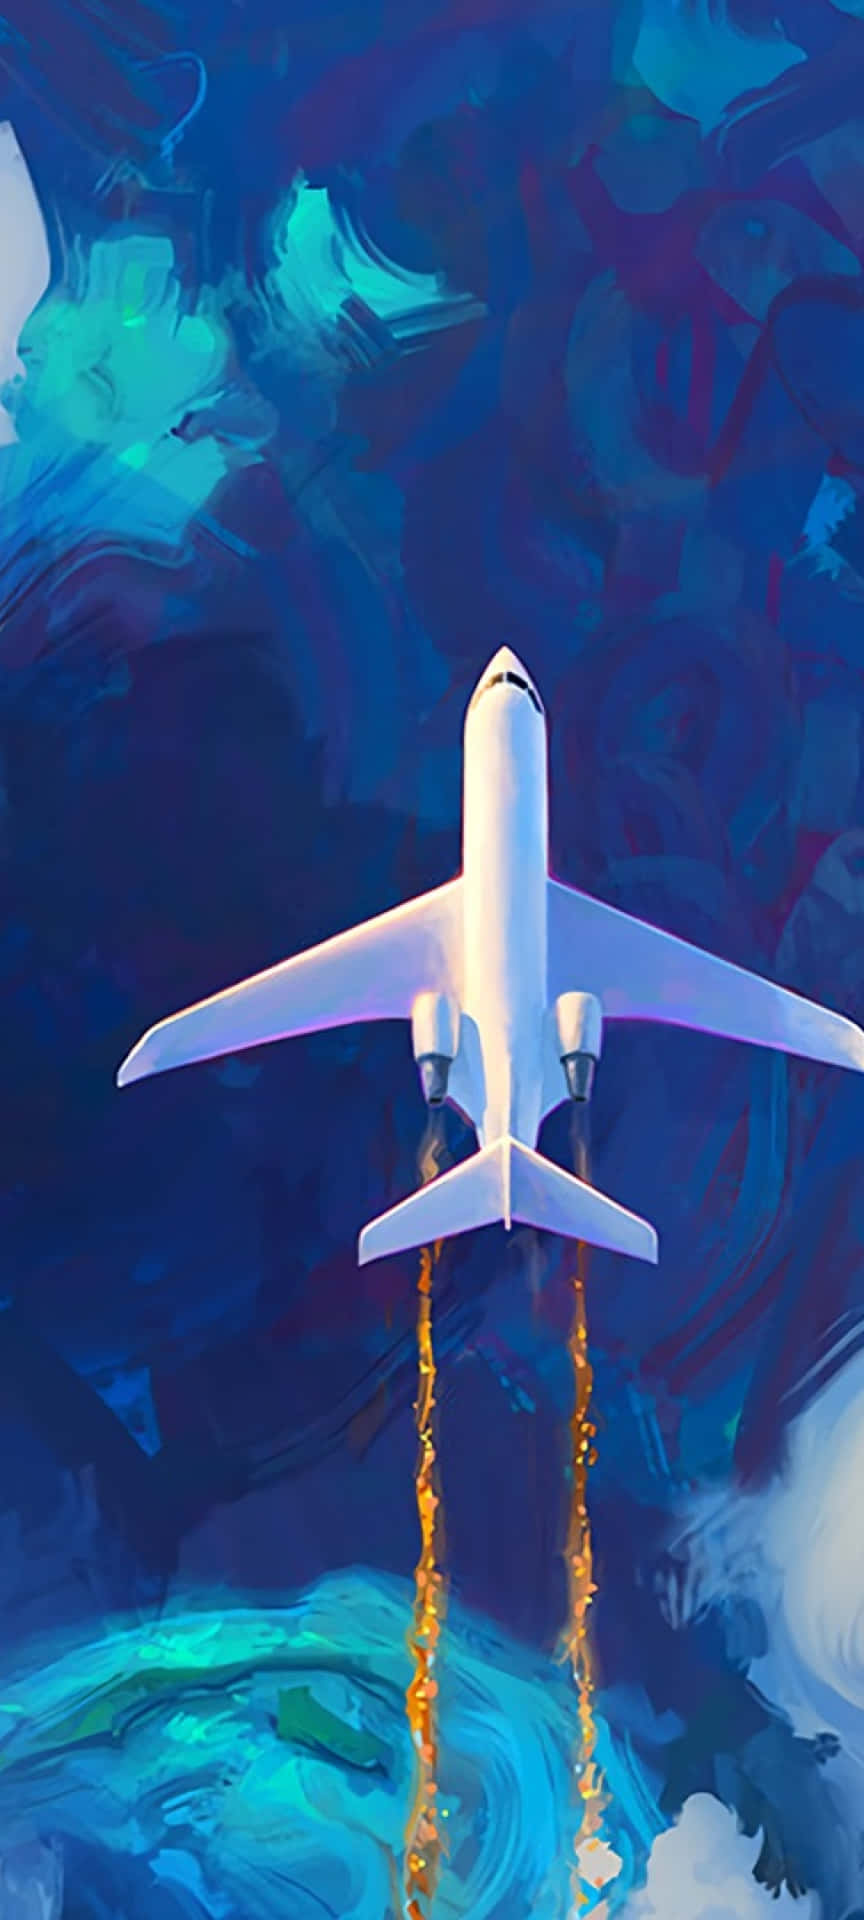 Take Flight with the Iphone Wallpaper